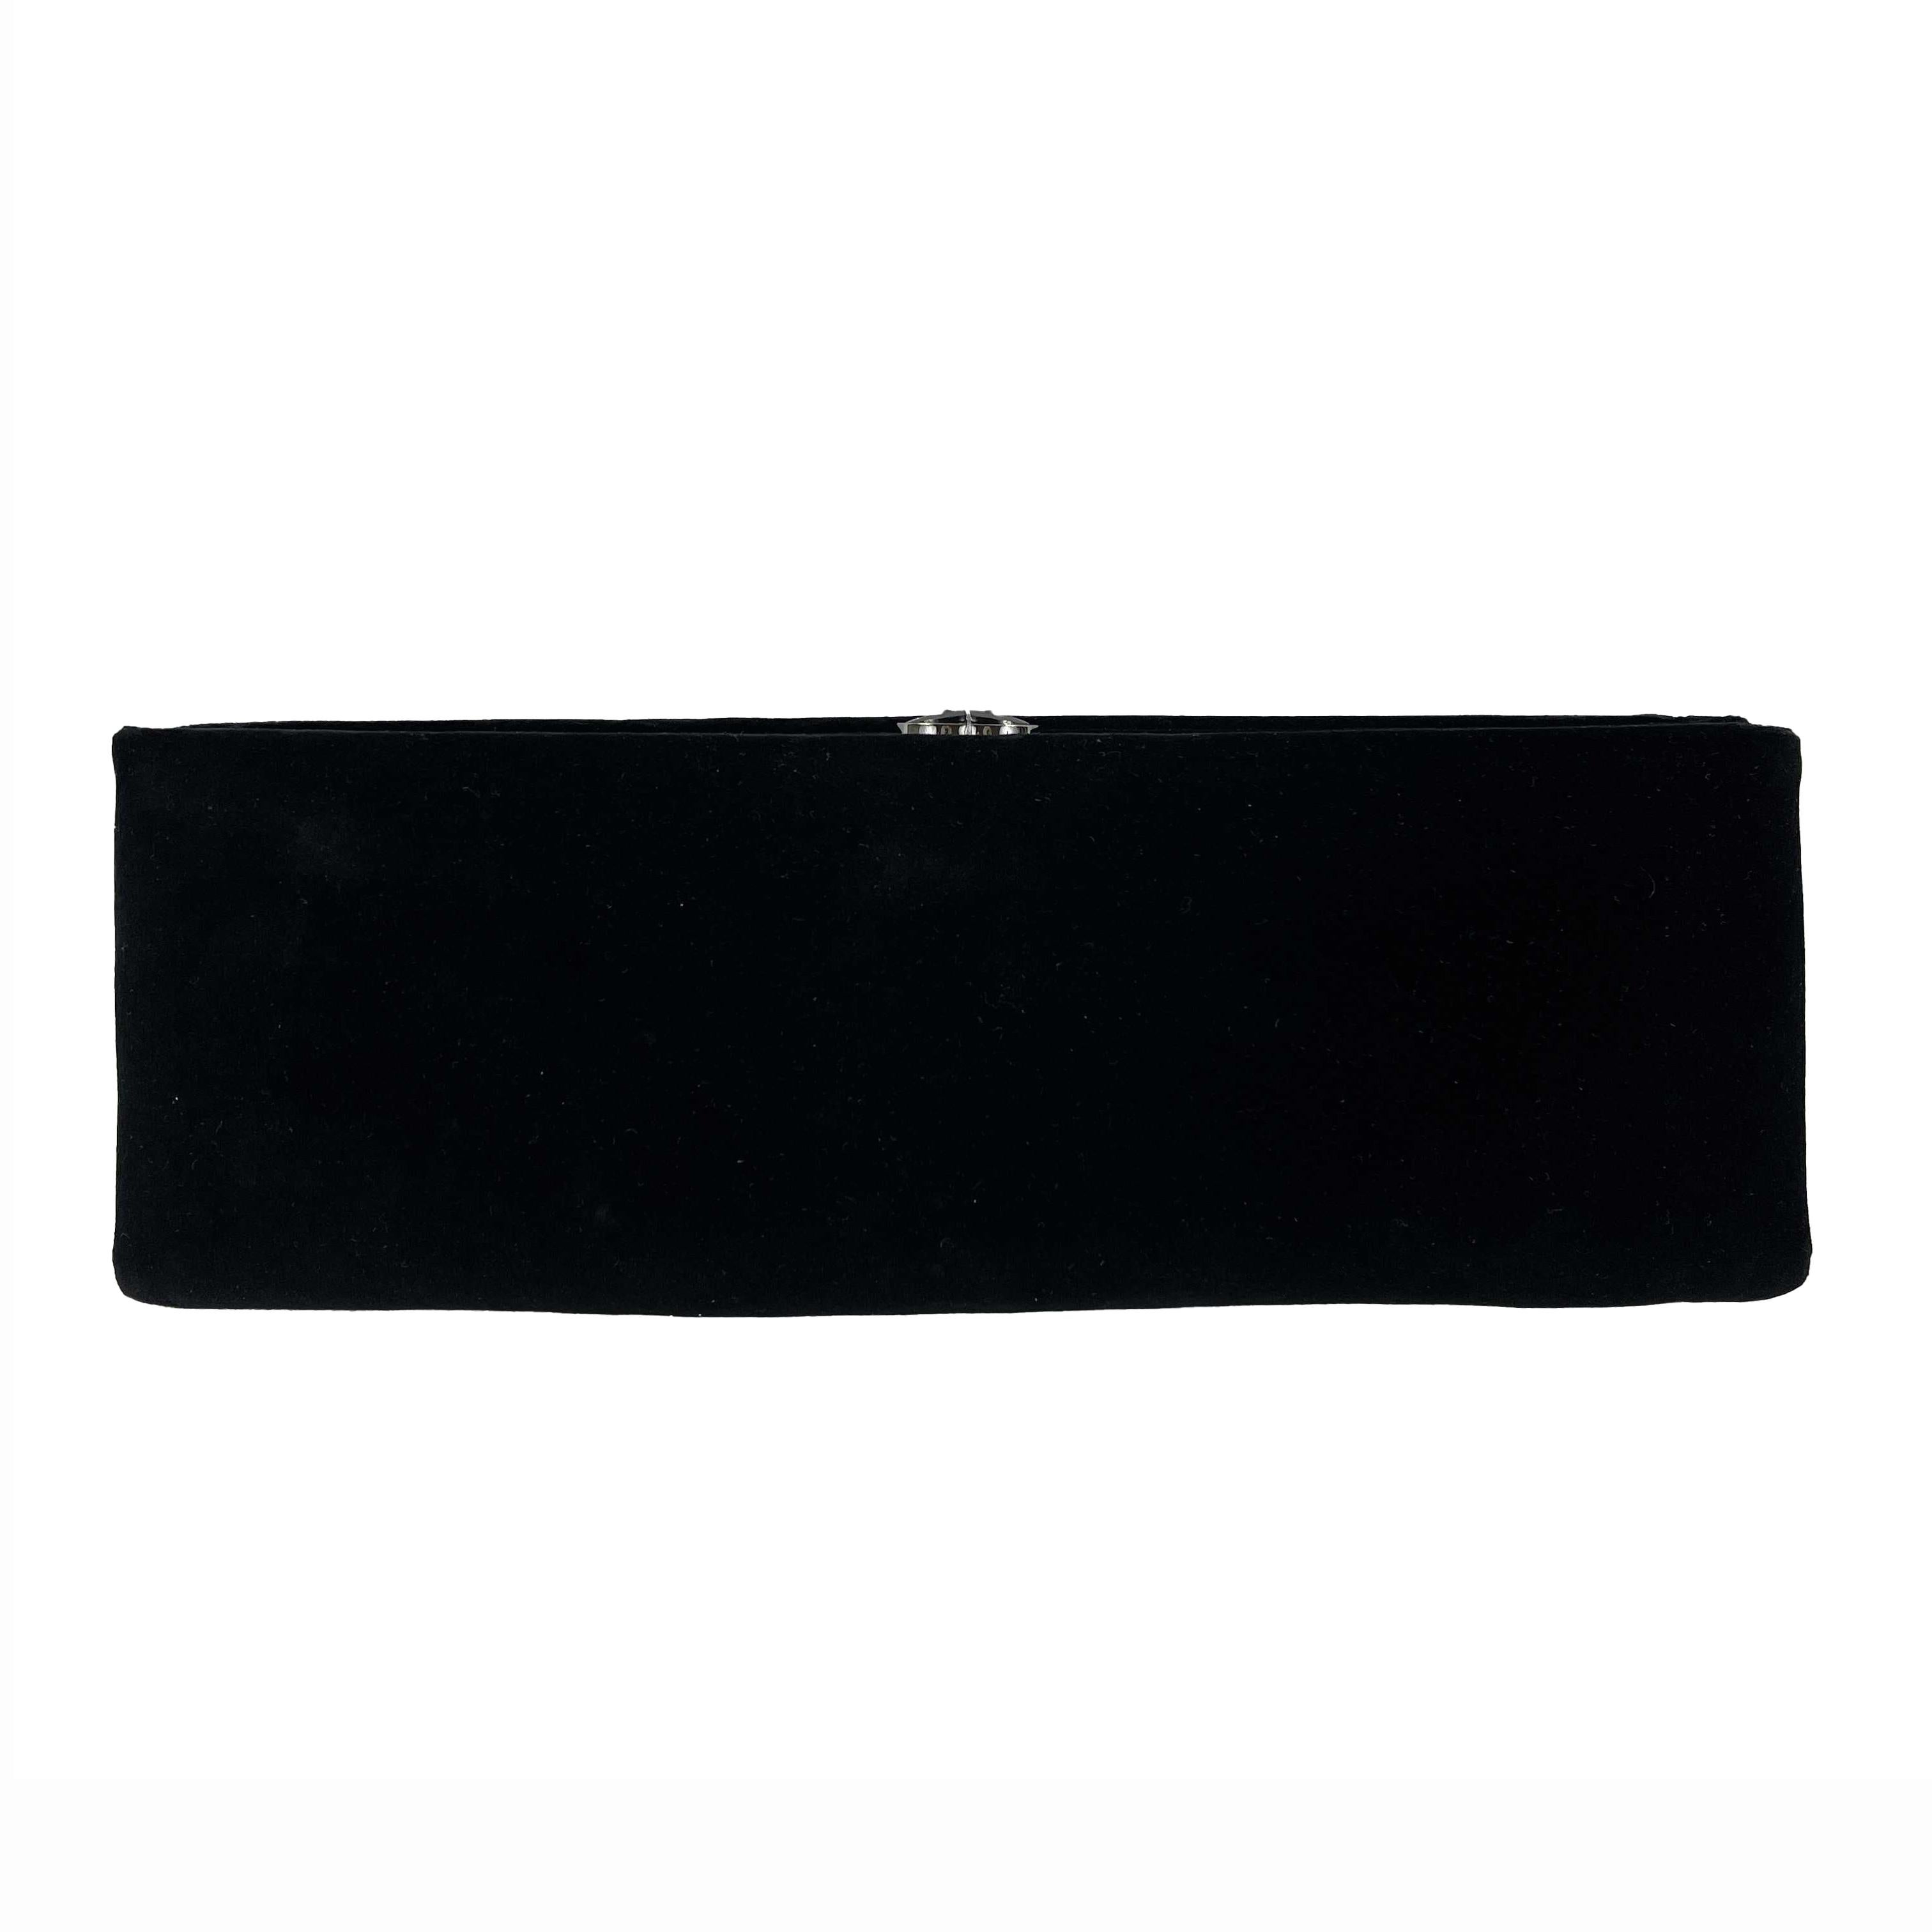 CHANEL - New w/ Tags - Velvet Embellished Butterfly Minaudiere Clutch - Black - Handbag

Description

Fall Metiers d’Art 2015 Collection.
This clutch is crafted of sumptuous black velvet fabric.
Features embellished feathers, sequins and crystals in